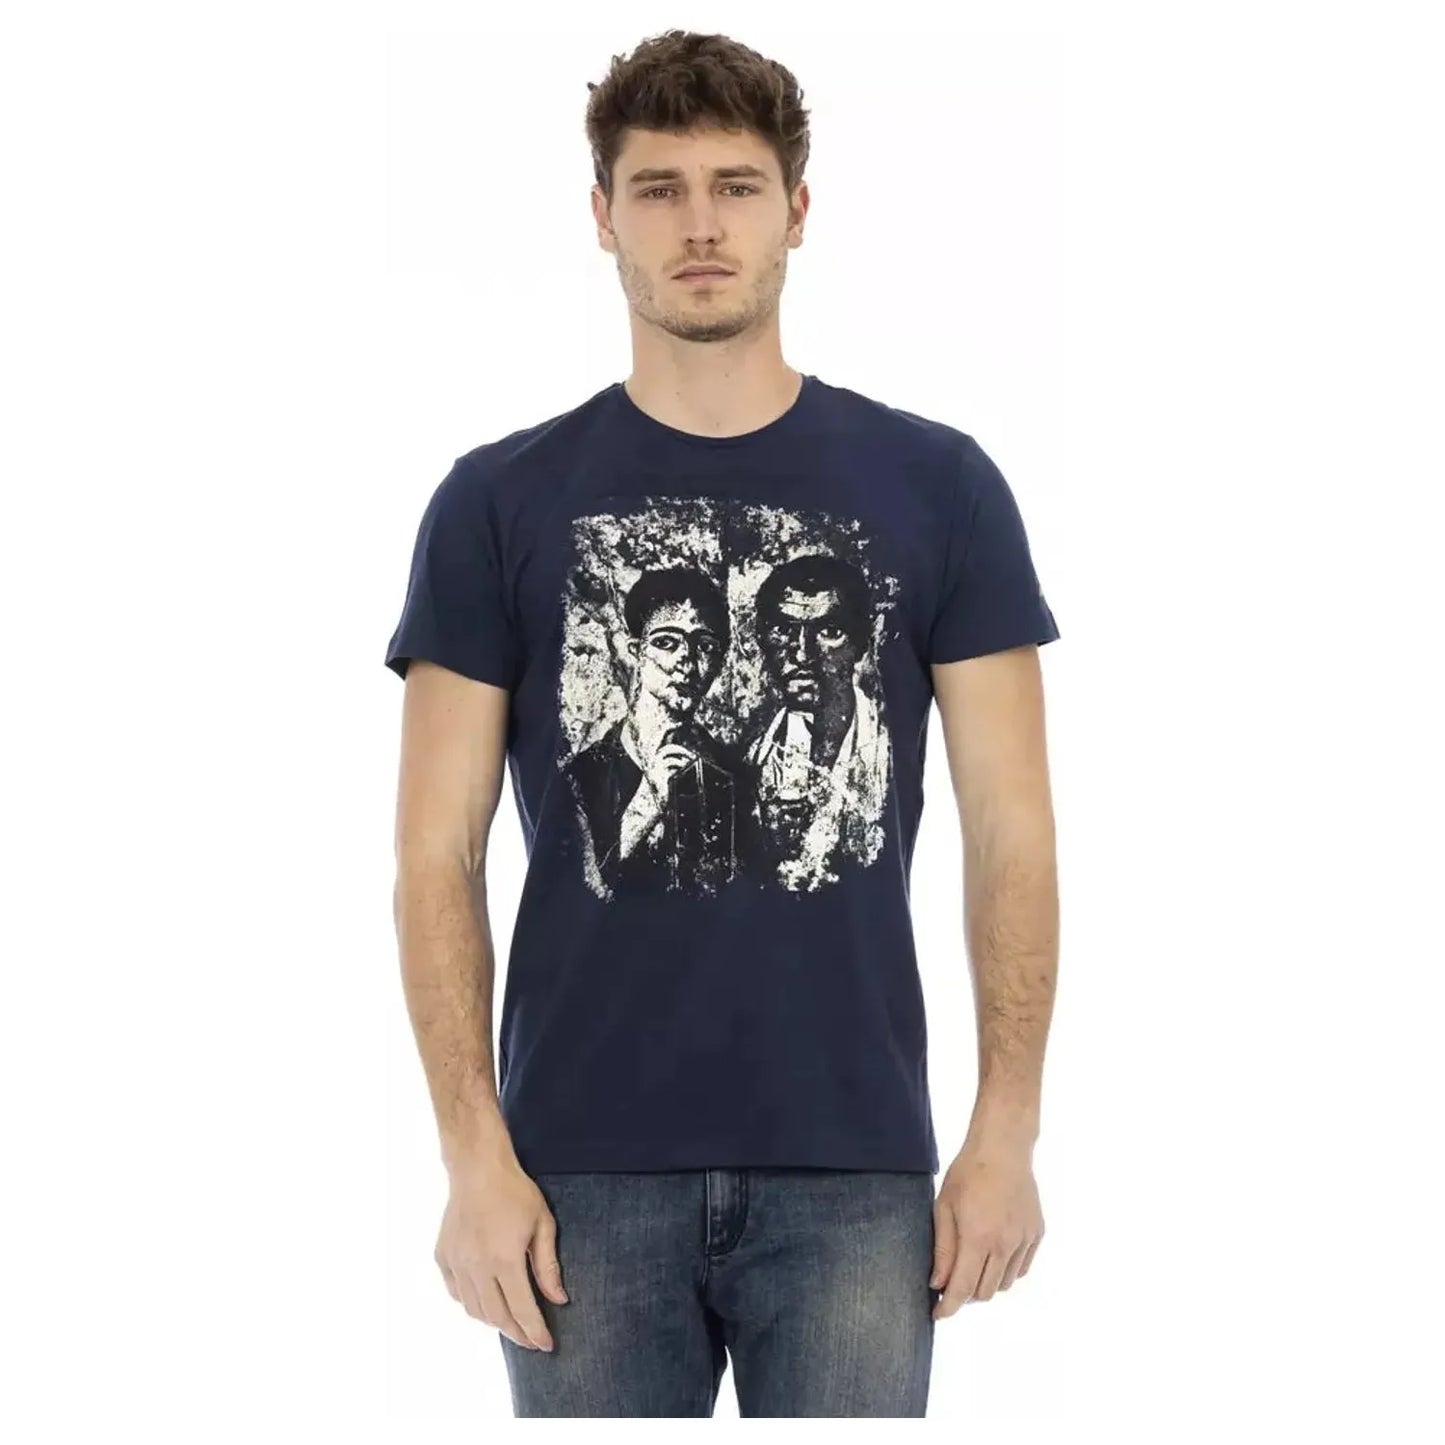 Trussardi Action Chic Blue Printed Tee with Short Sleeves blue-cotton-t-shirt-19 product-22817-1279816892-28-a166da1f-5f5.webp